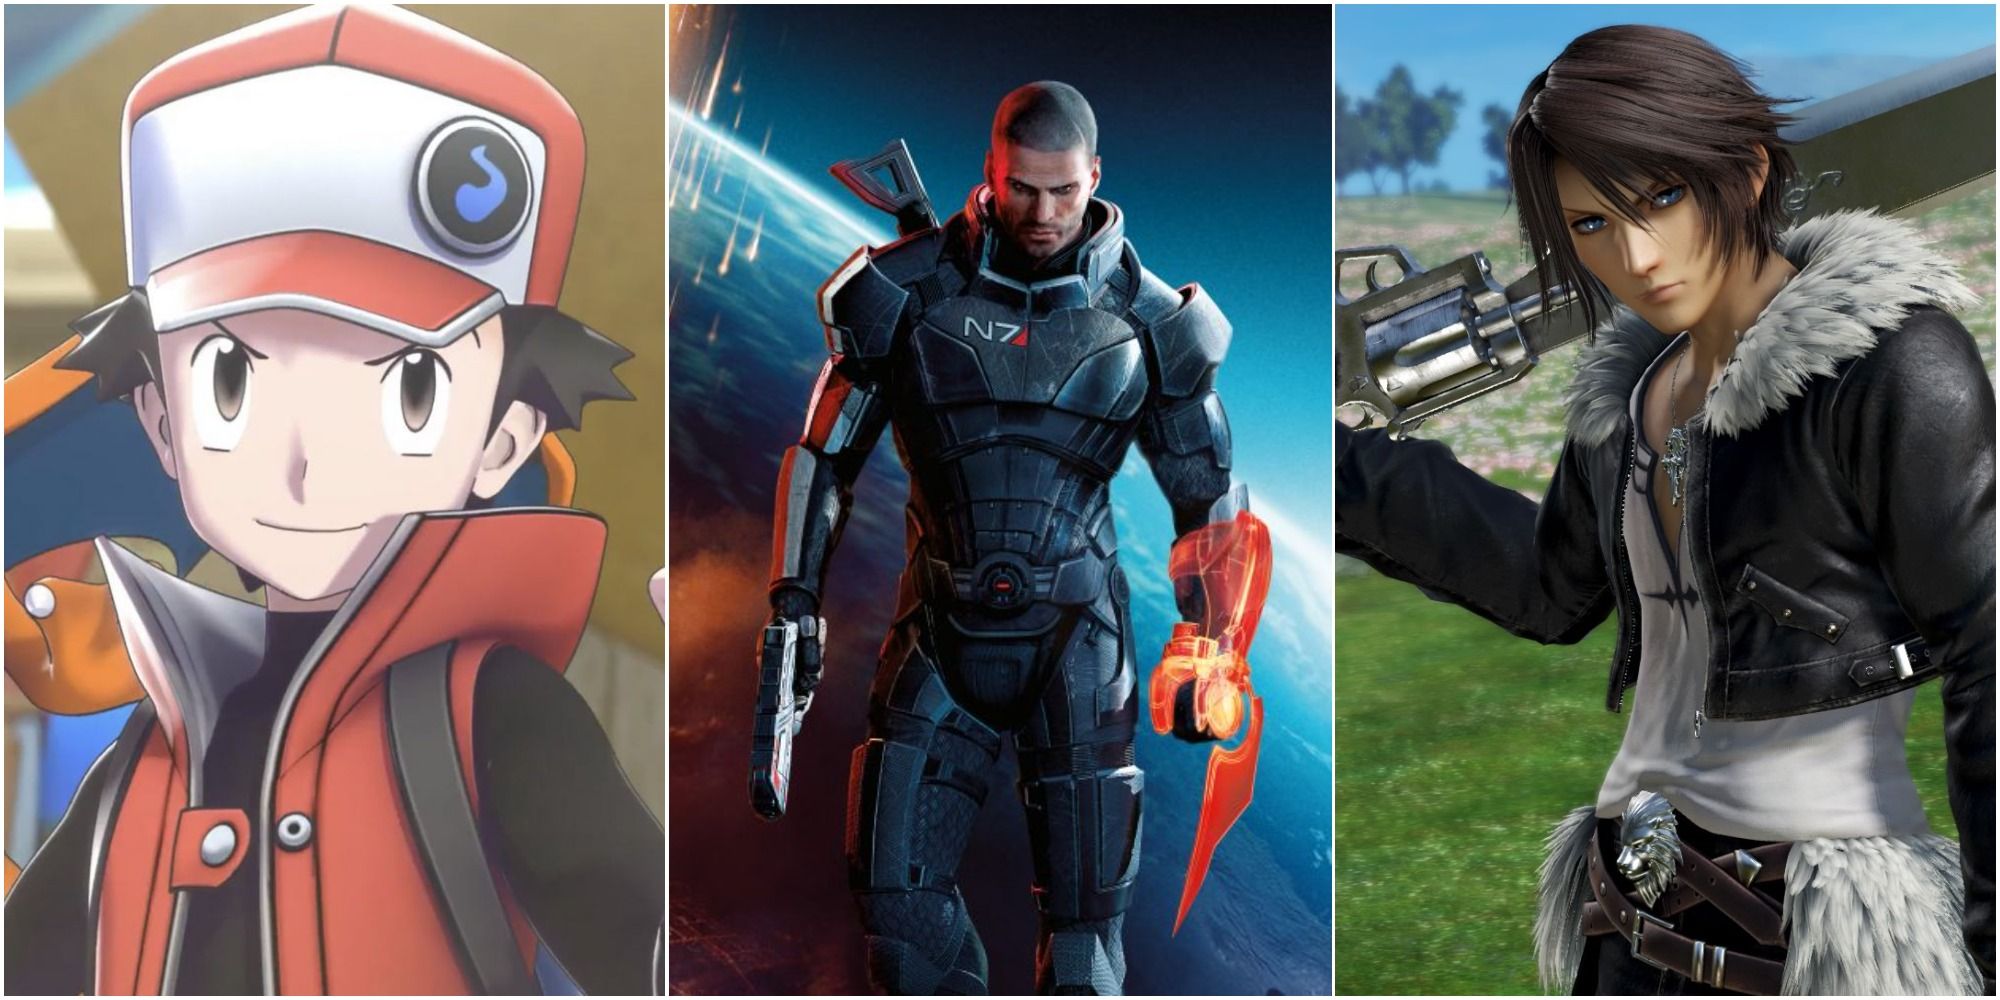 Fan Theories Featured - Pokemon, Mass Effect 3, Squall